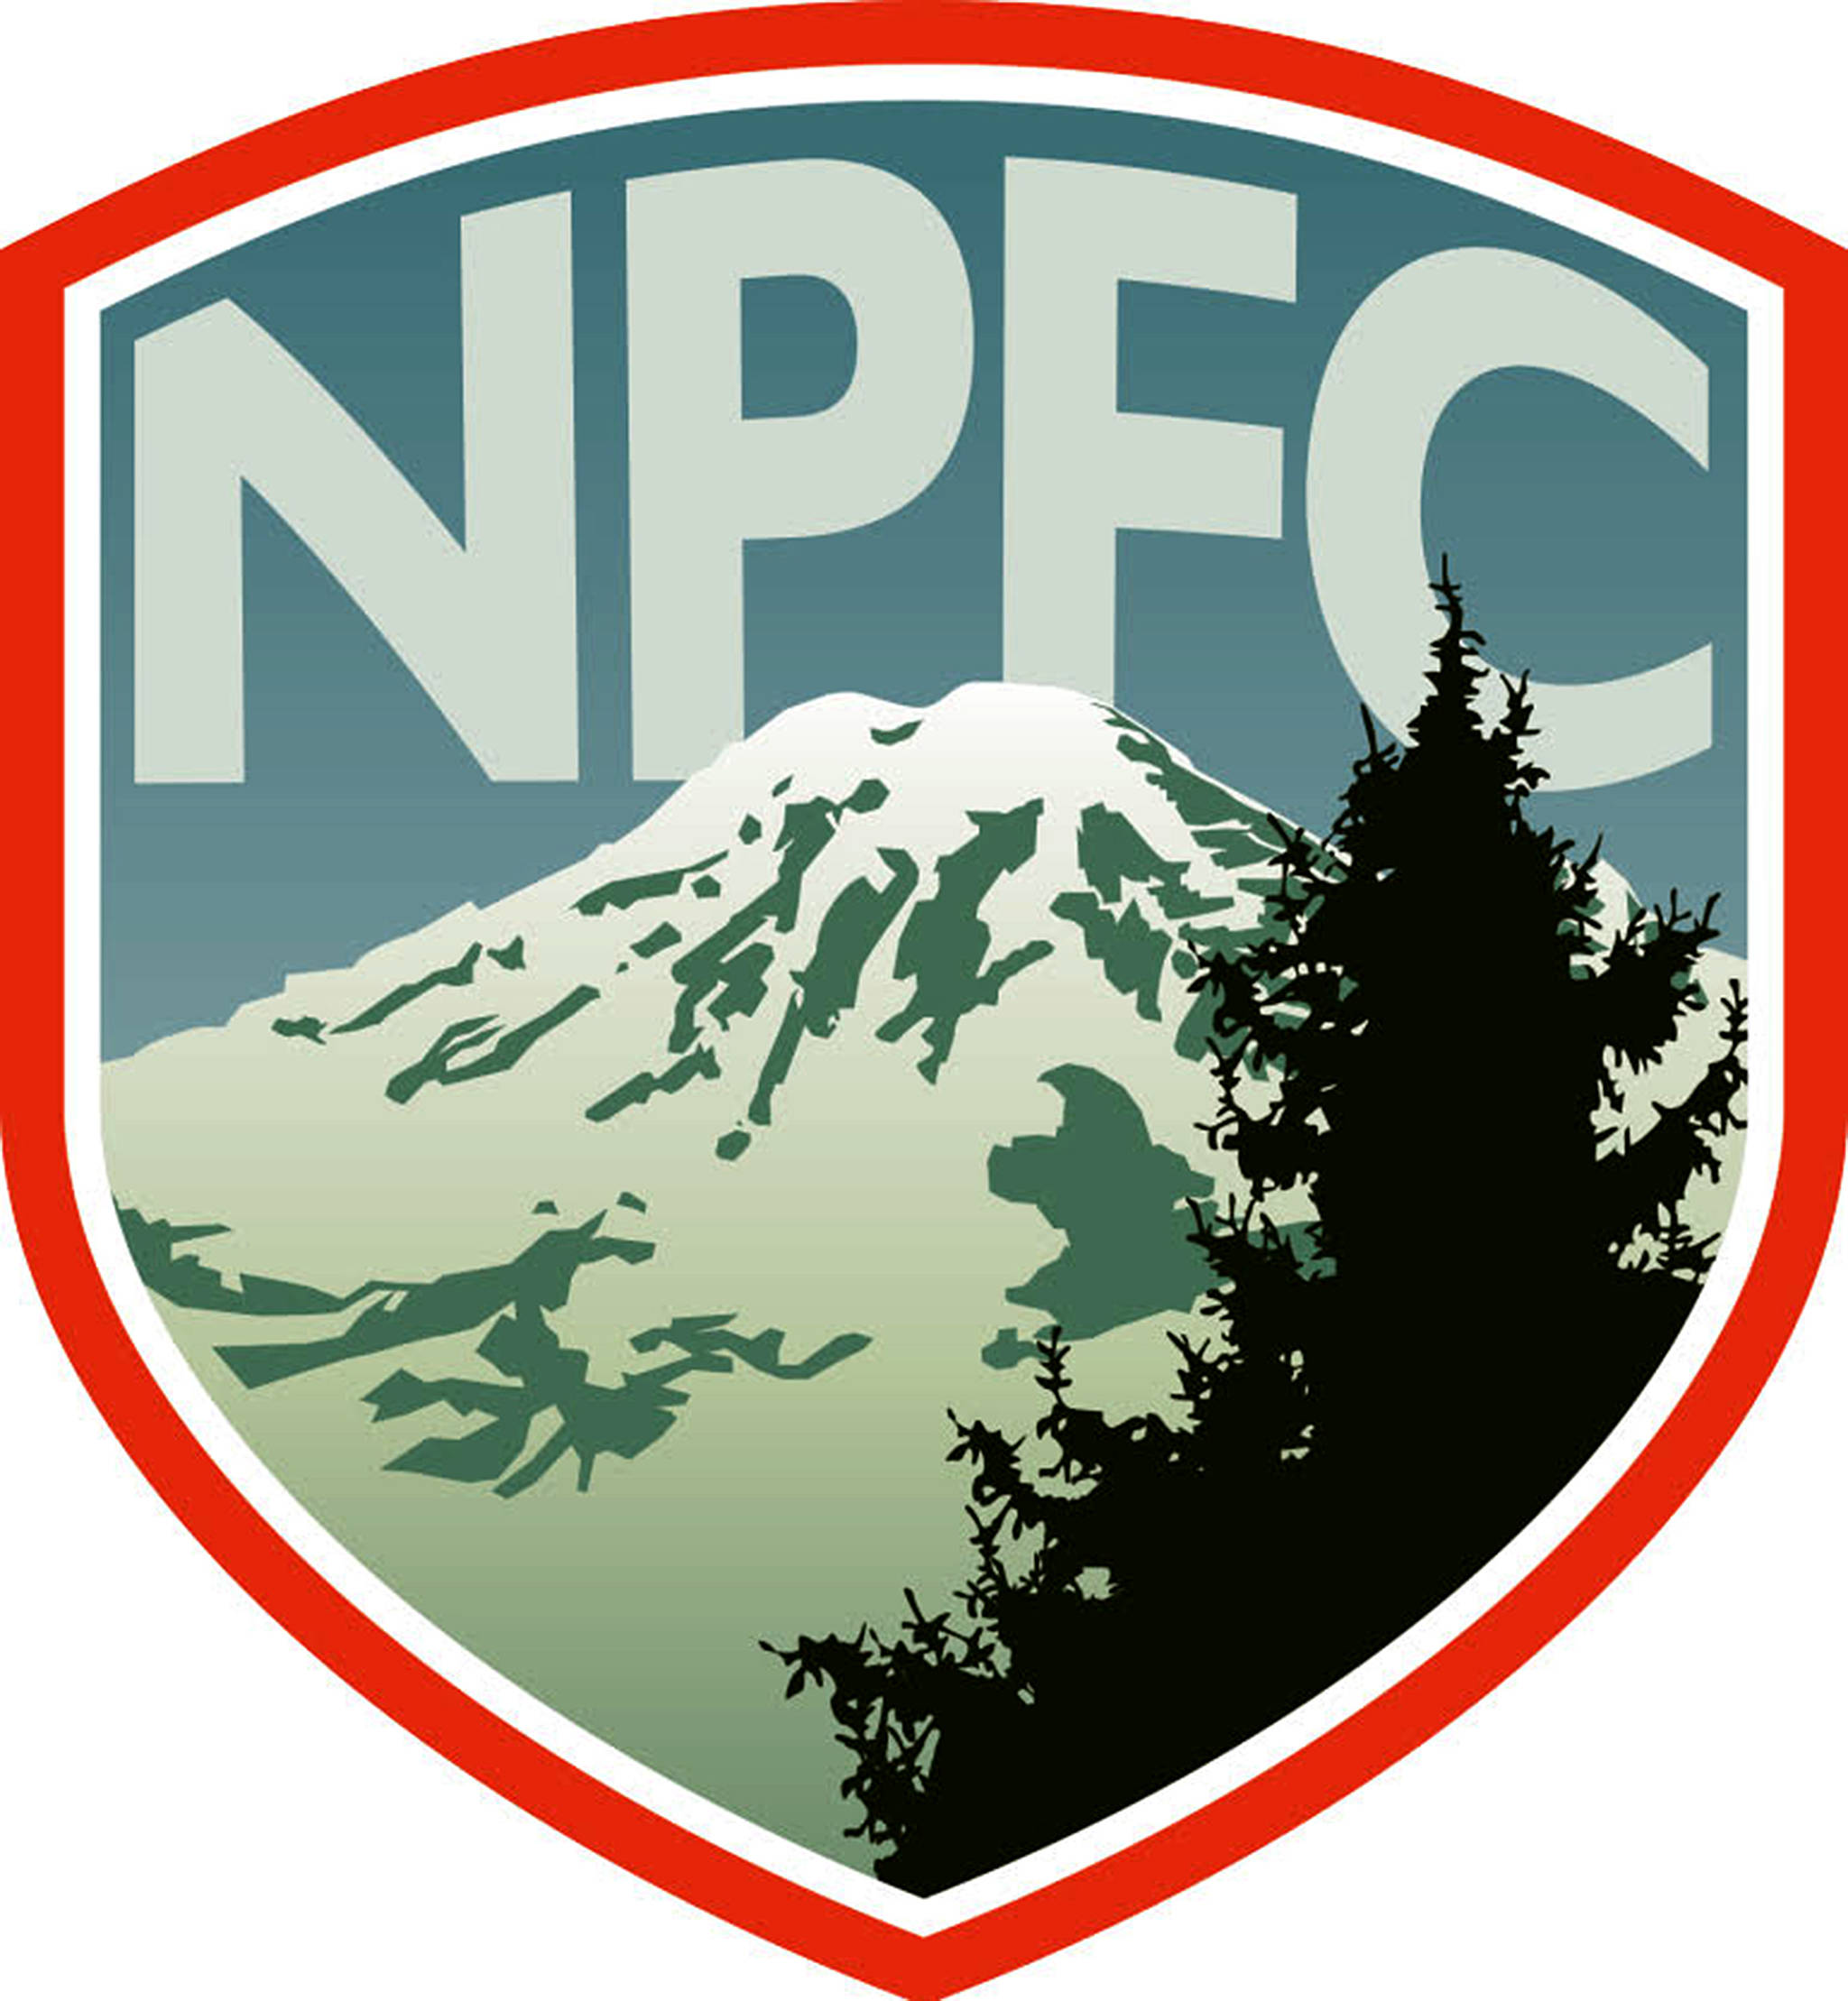 The crest of the new Northern Peninsula FC semi-pro club that will play in the second division of the Western Washington Premier League starting the last weekend of April. Image submitted